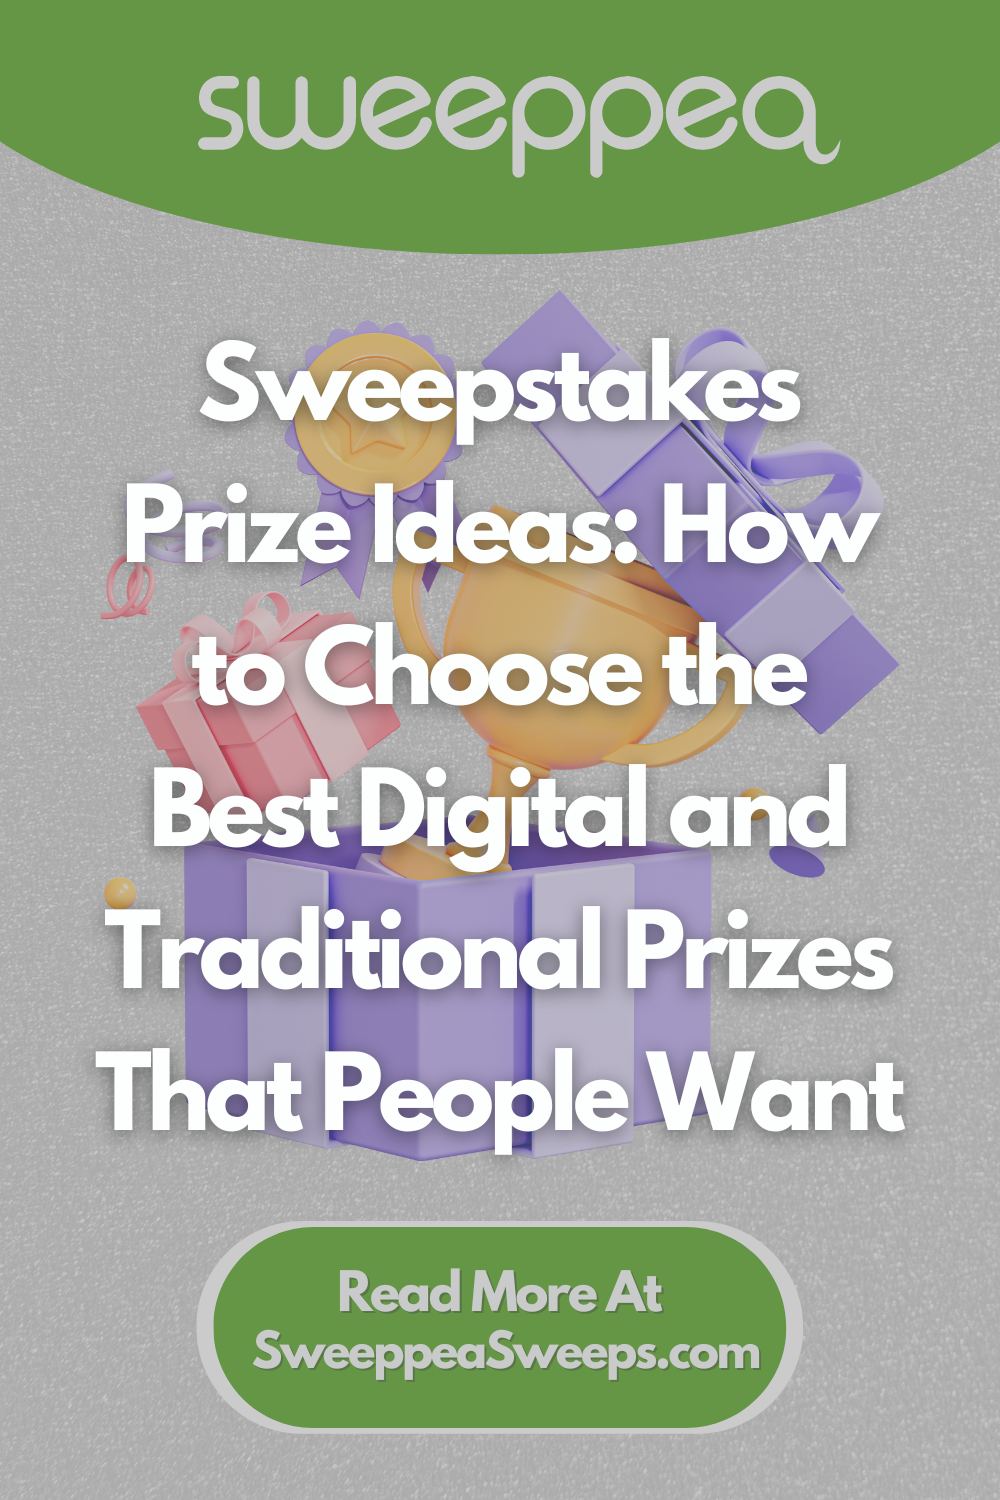 Sweepstakes Prize Ideas How to Choose the Best Digital and Traditional Prizes That People Want